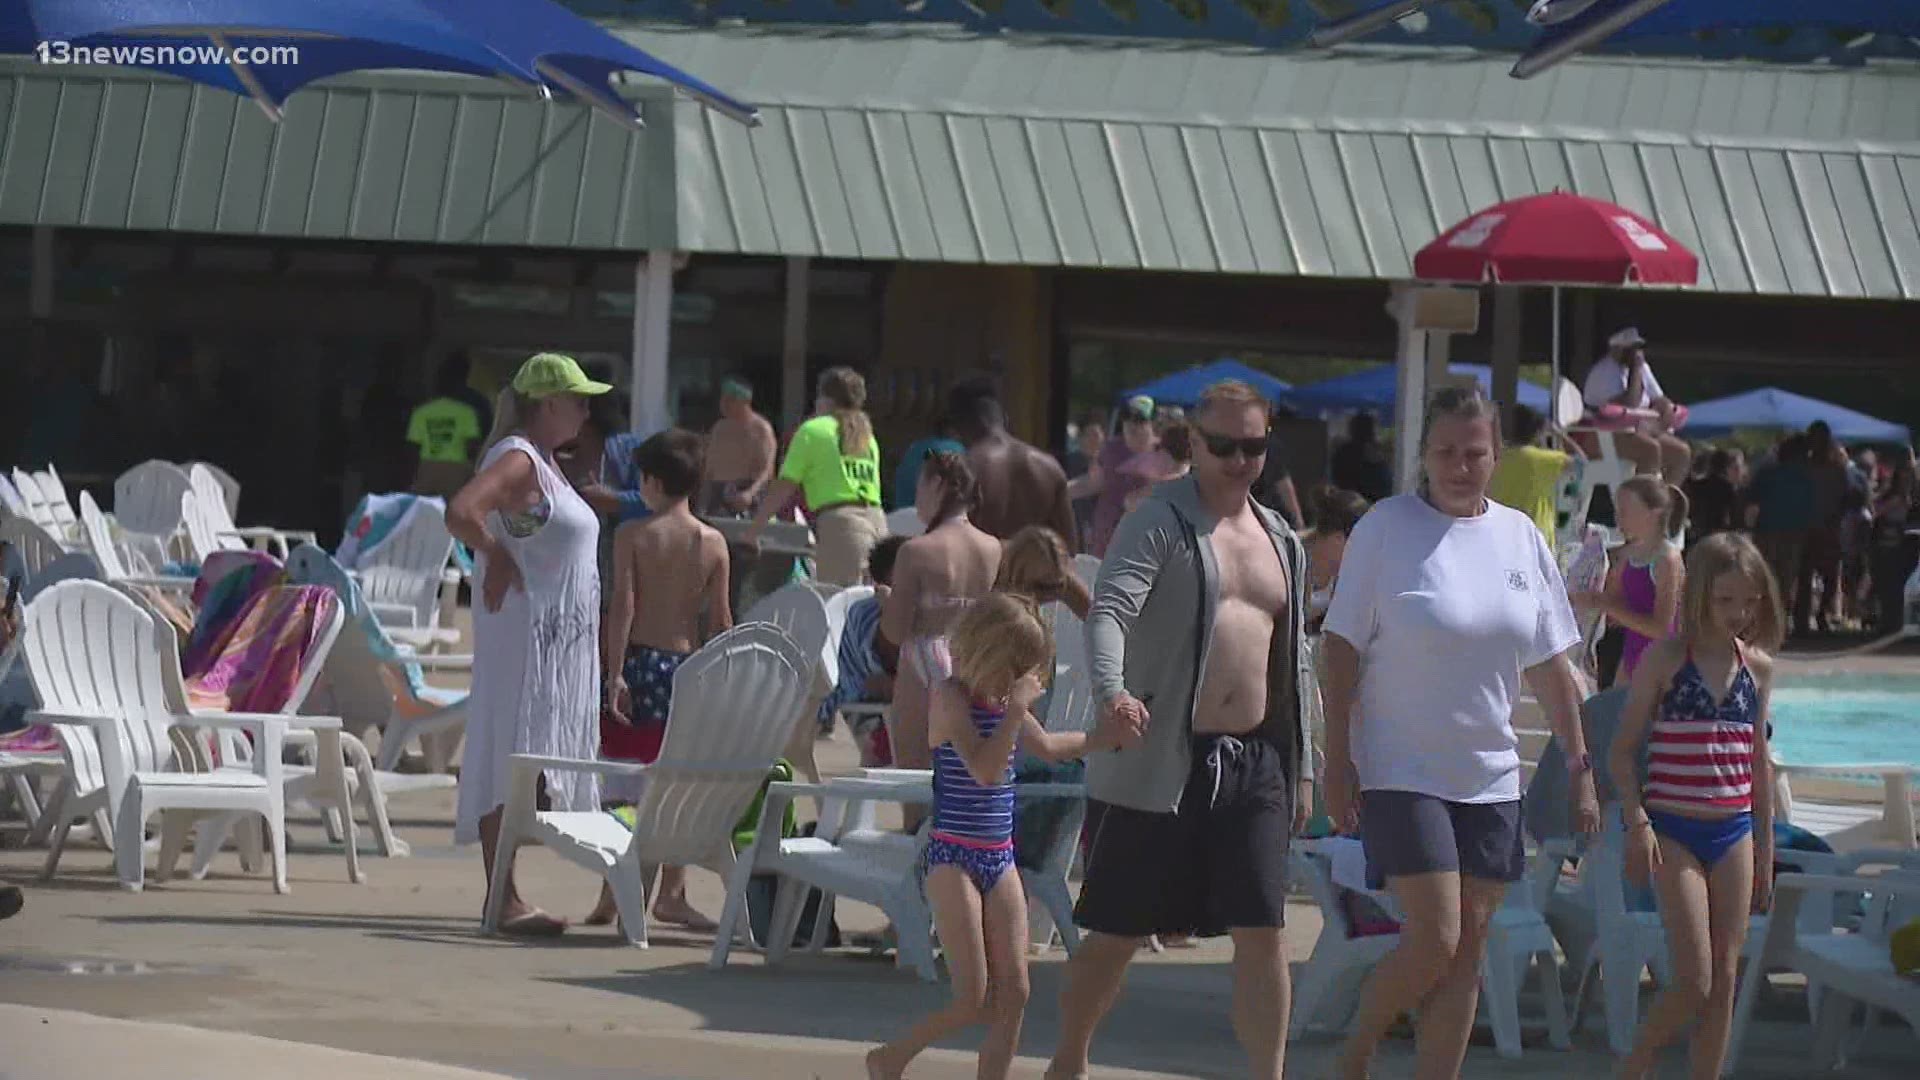 Although there’s a lifeguard shortage, officials at Ocean Breeze said they’re ready for the season.